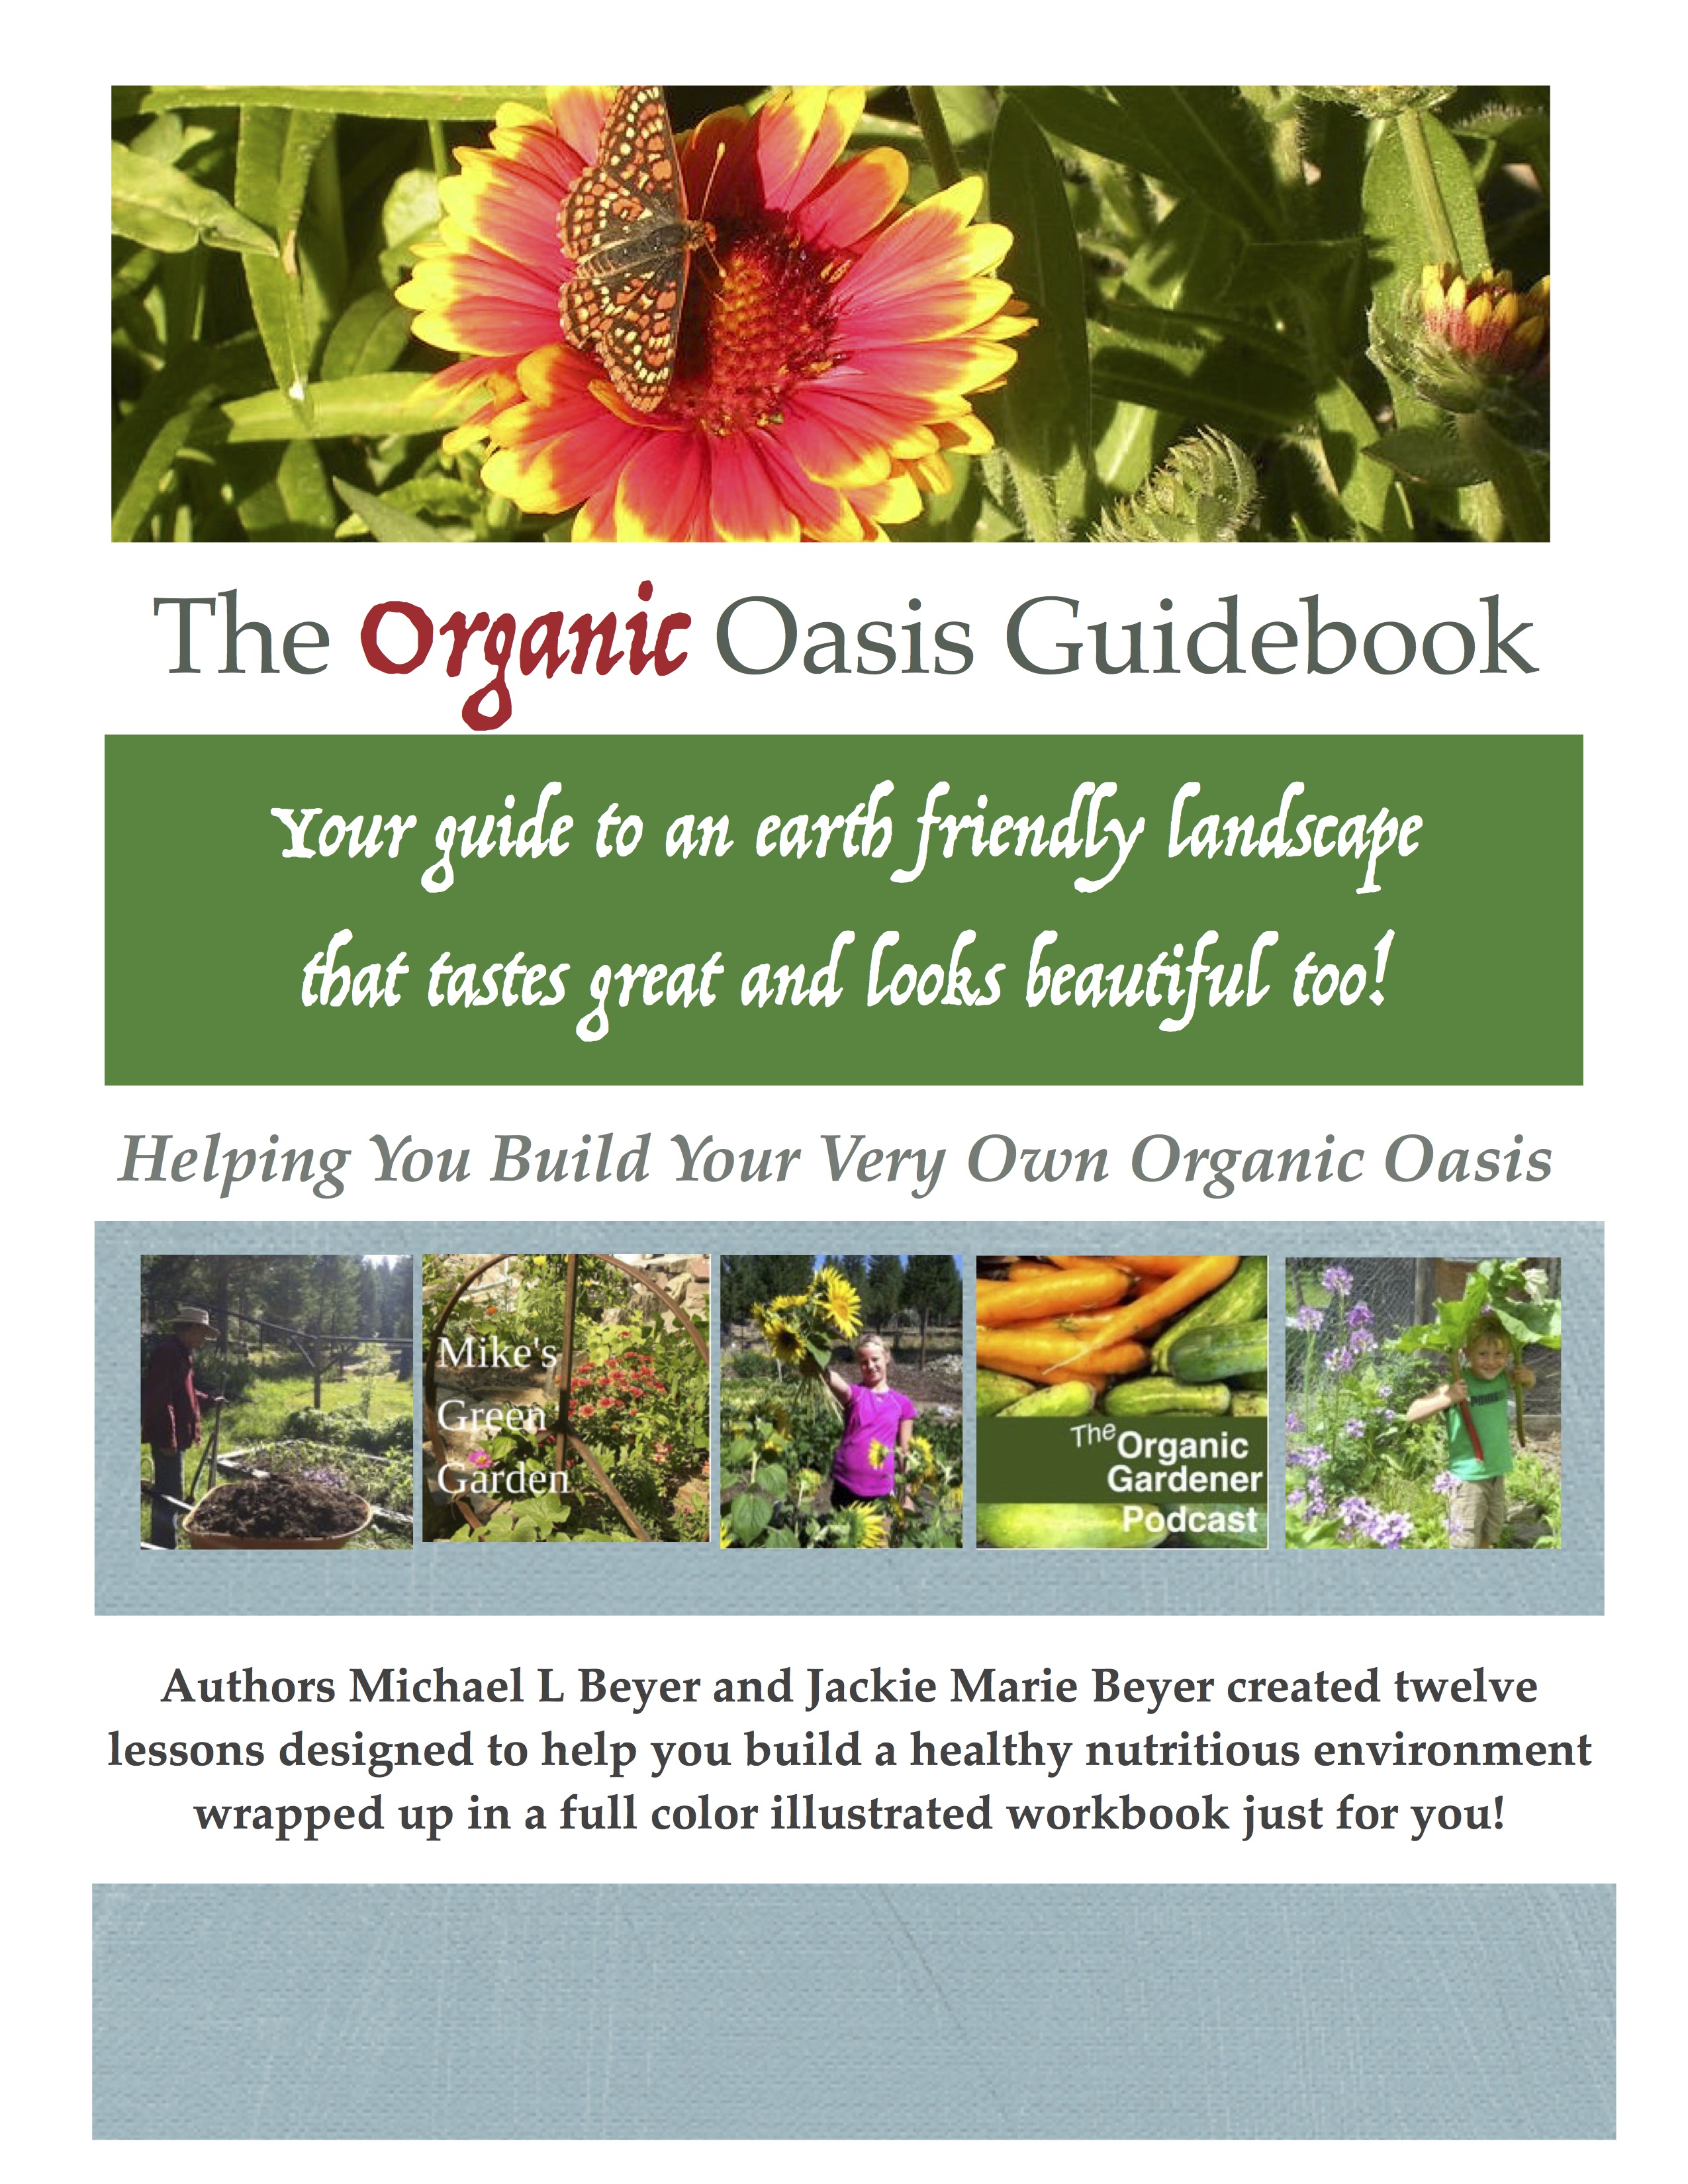 The Organic Oasis Guidebook: Helping You Create Your Own Organic Oasis